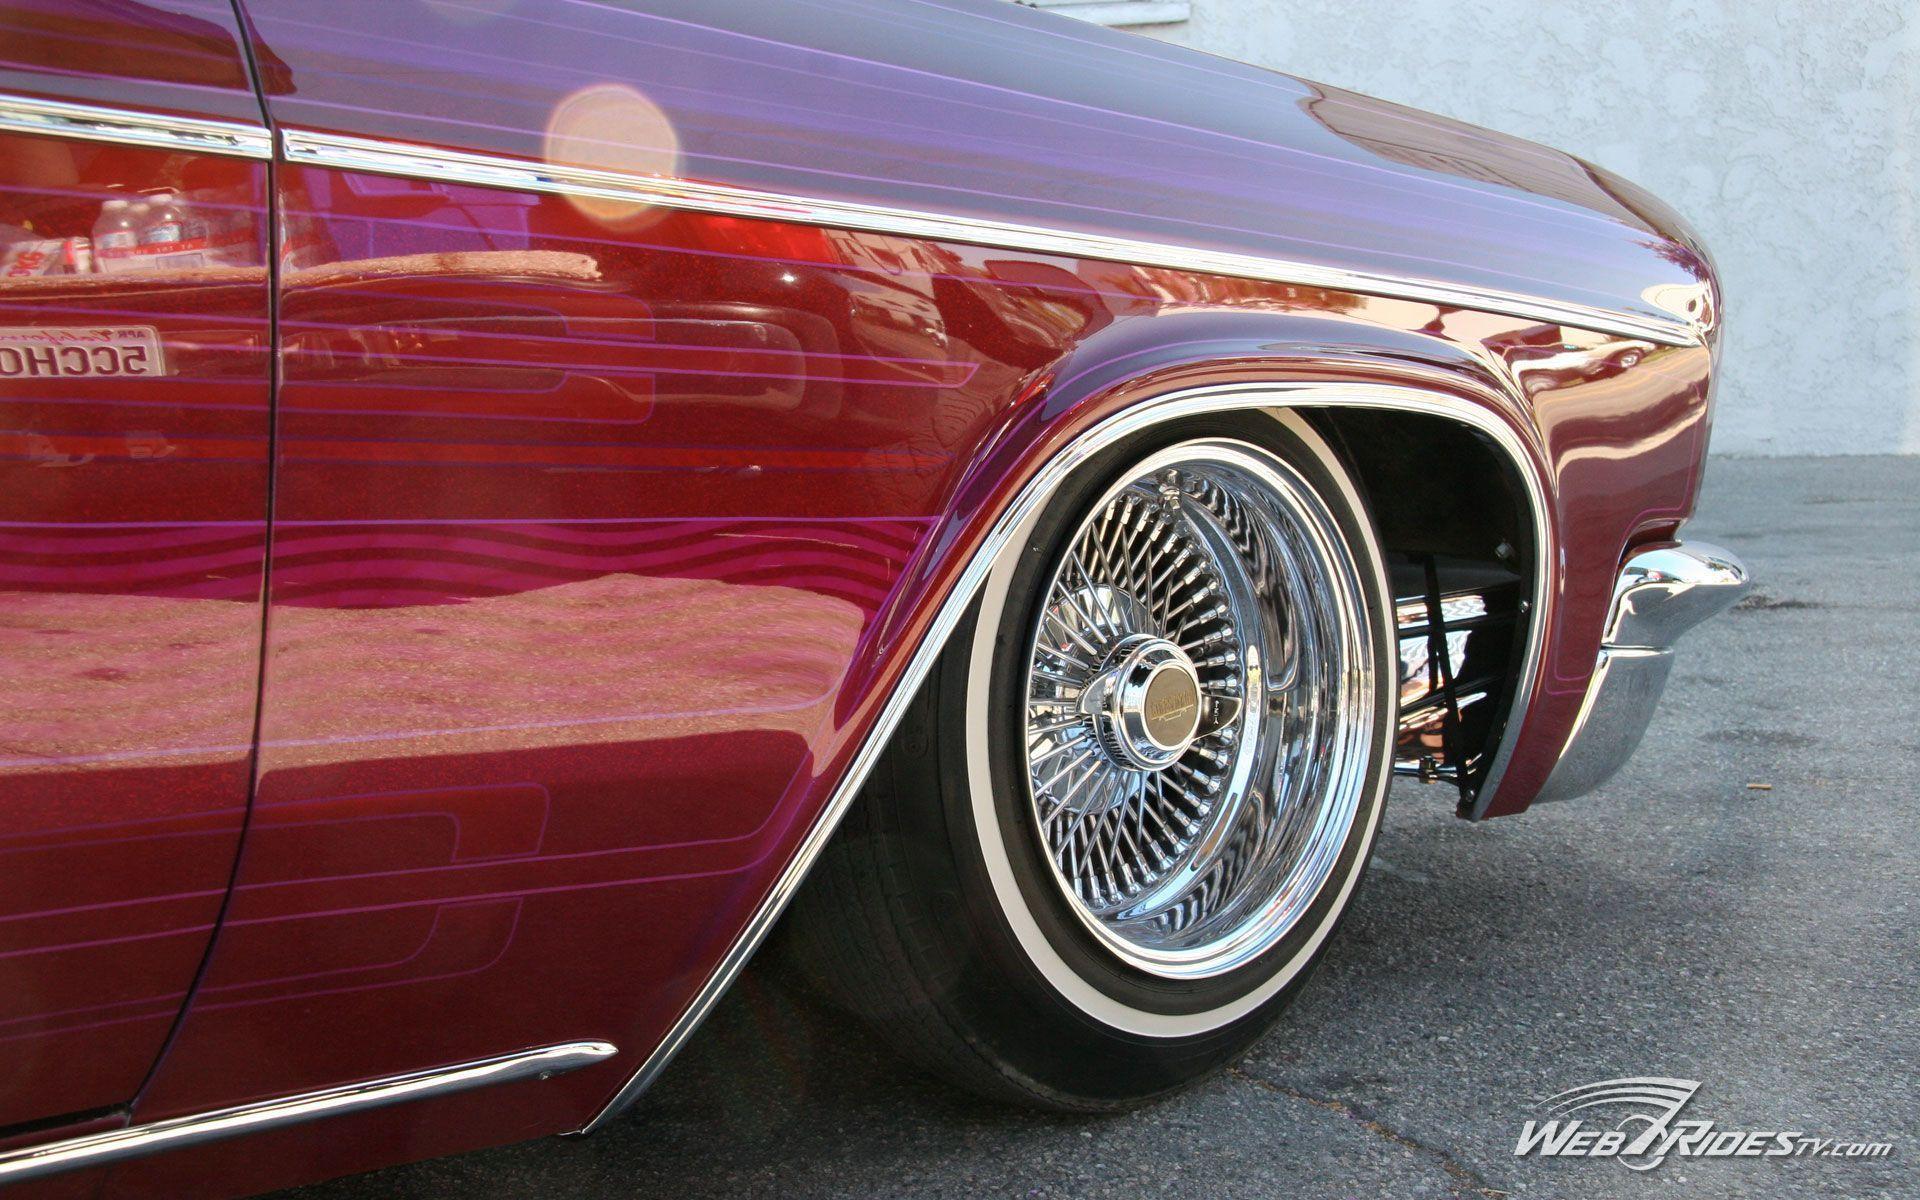 image For > Lowrider Cars Wallpaper